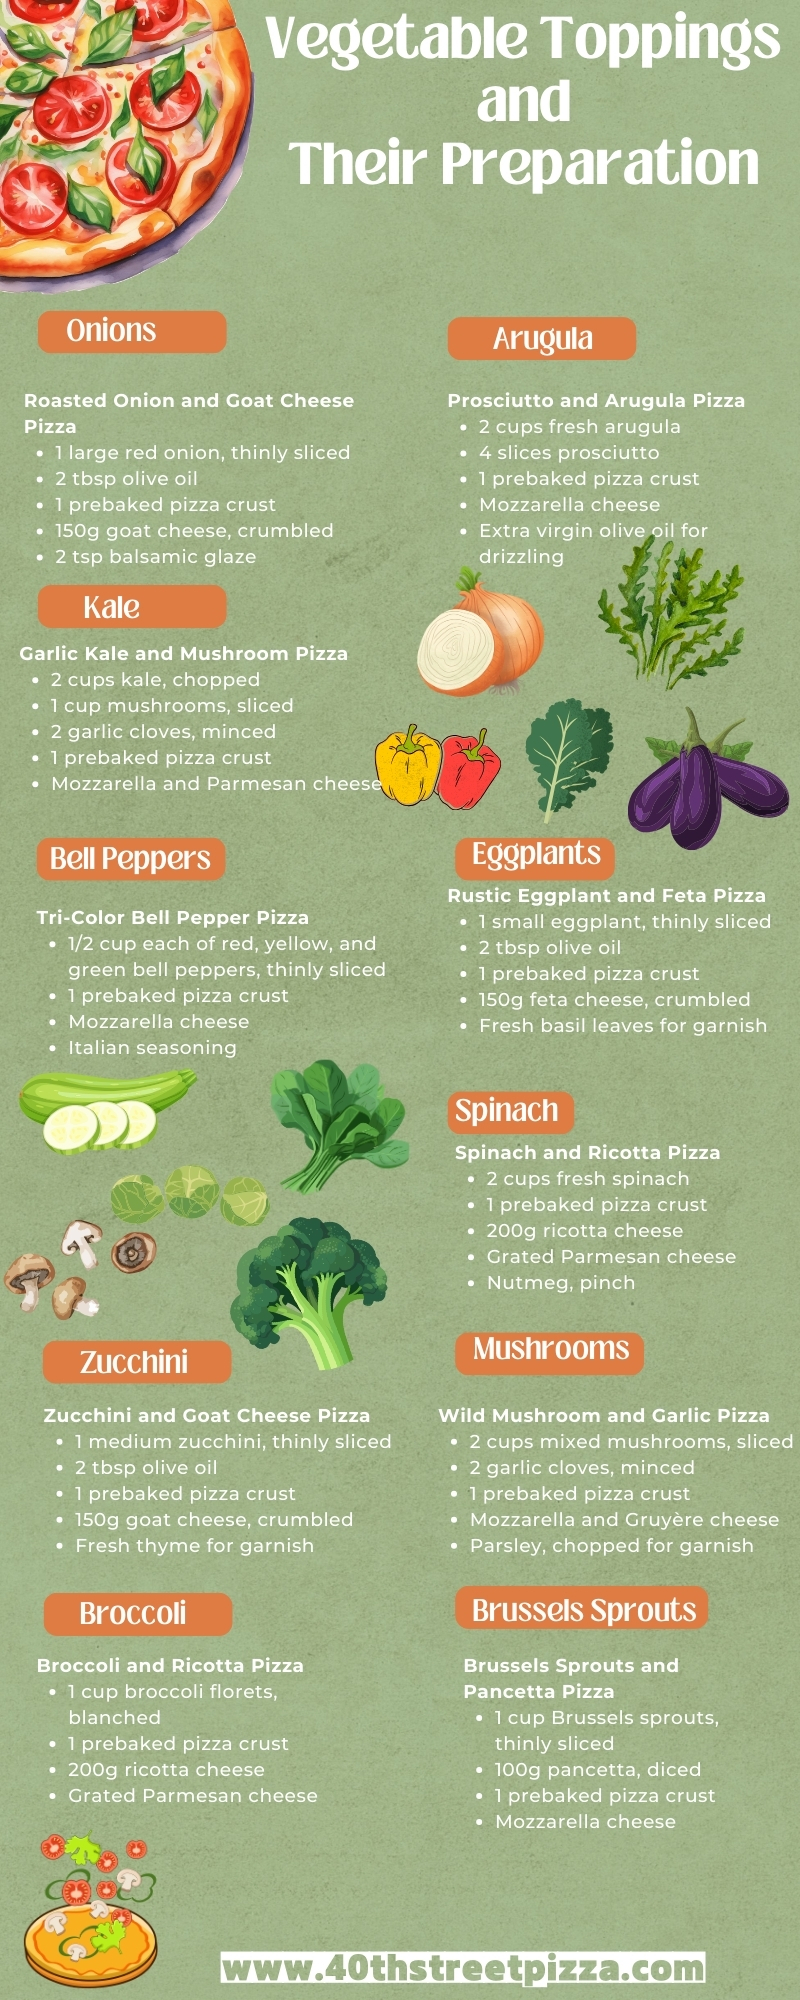 Vegetable Toppings and Their Preparation infographic